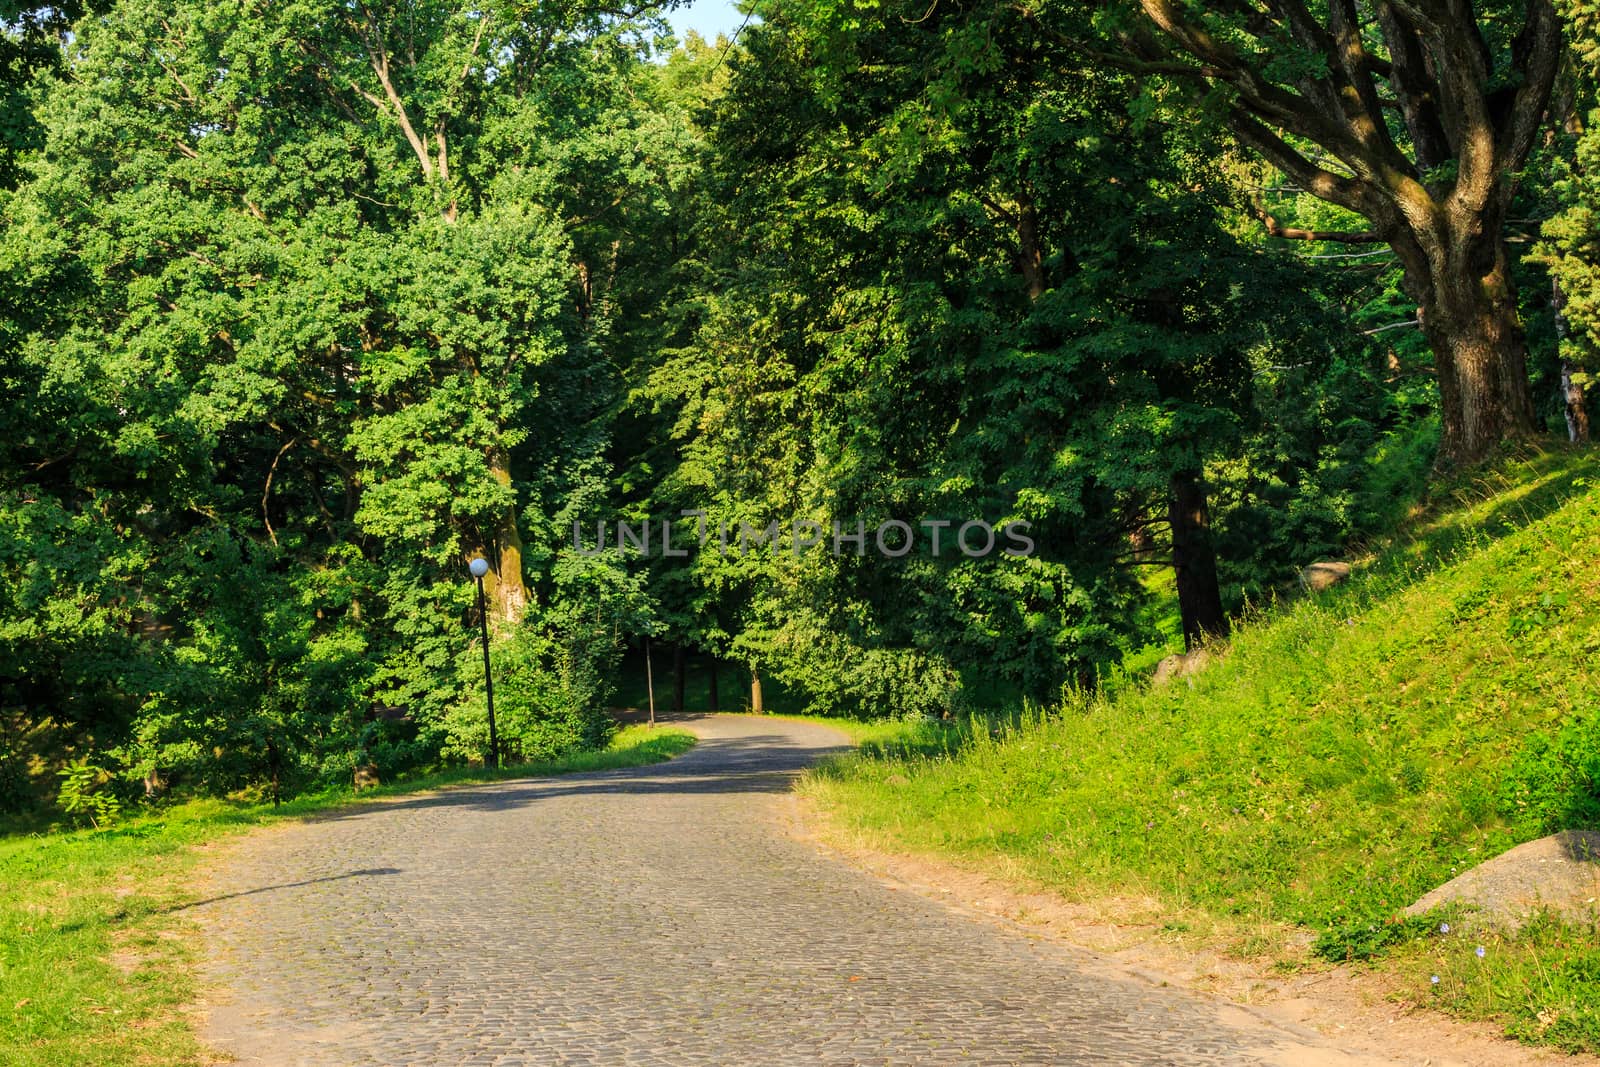 paved path winding among the trees in a city park horizontal